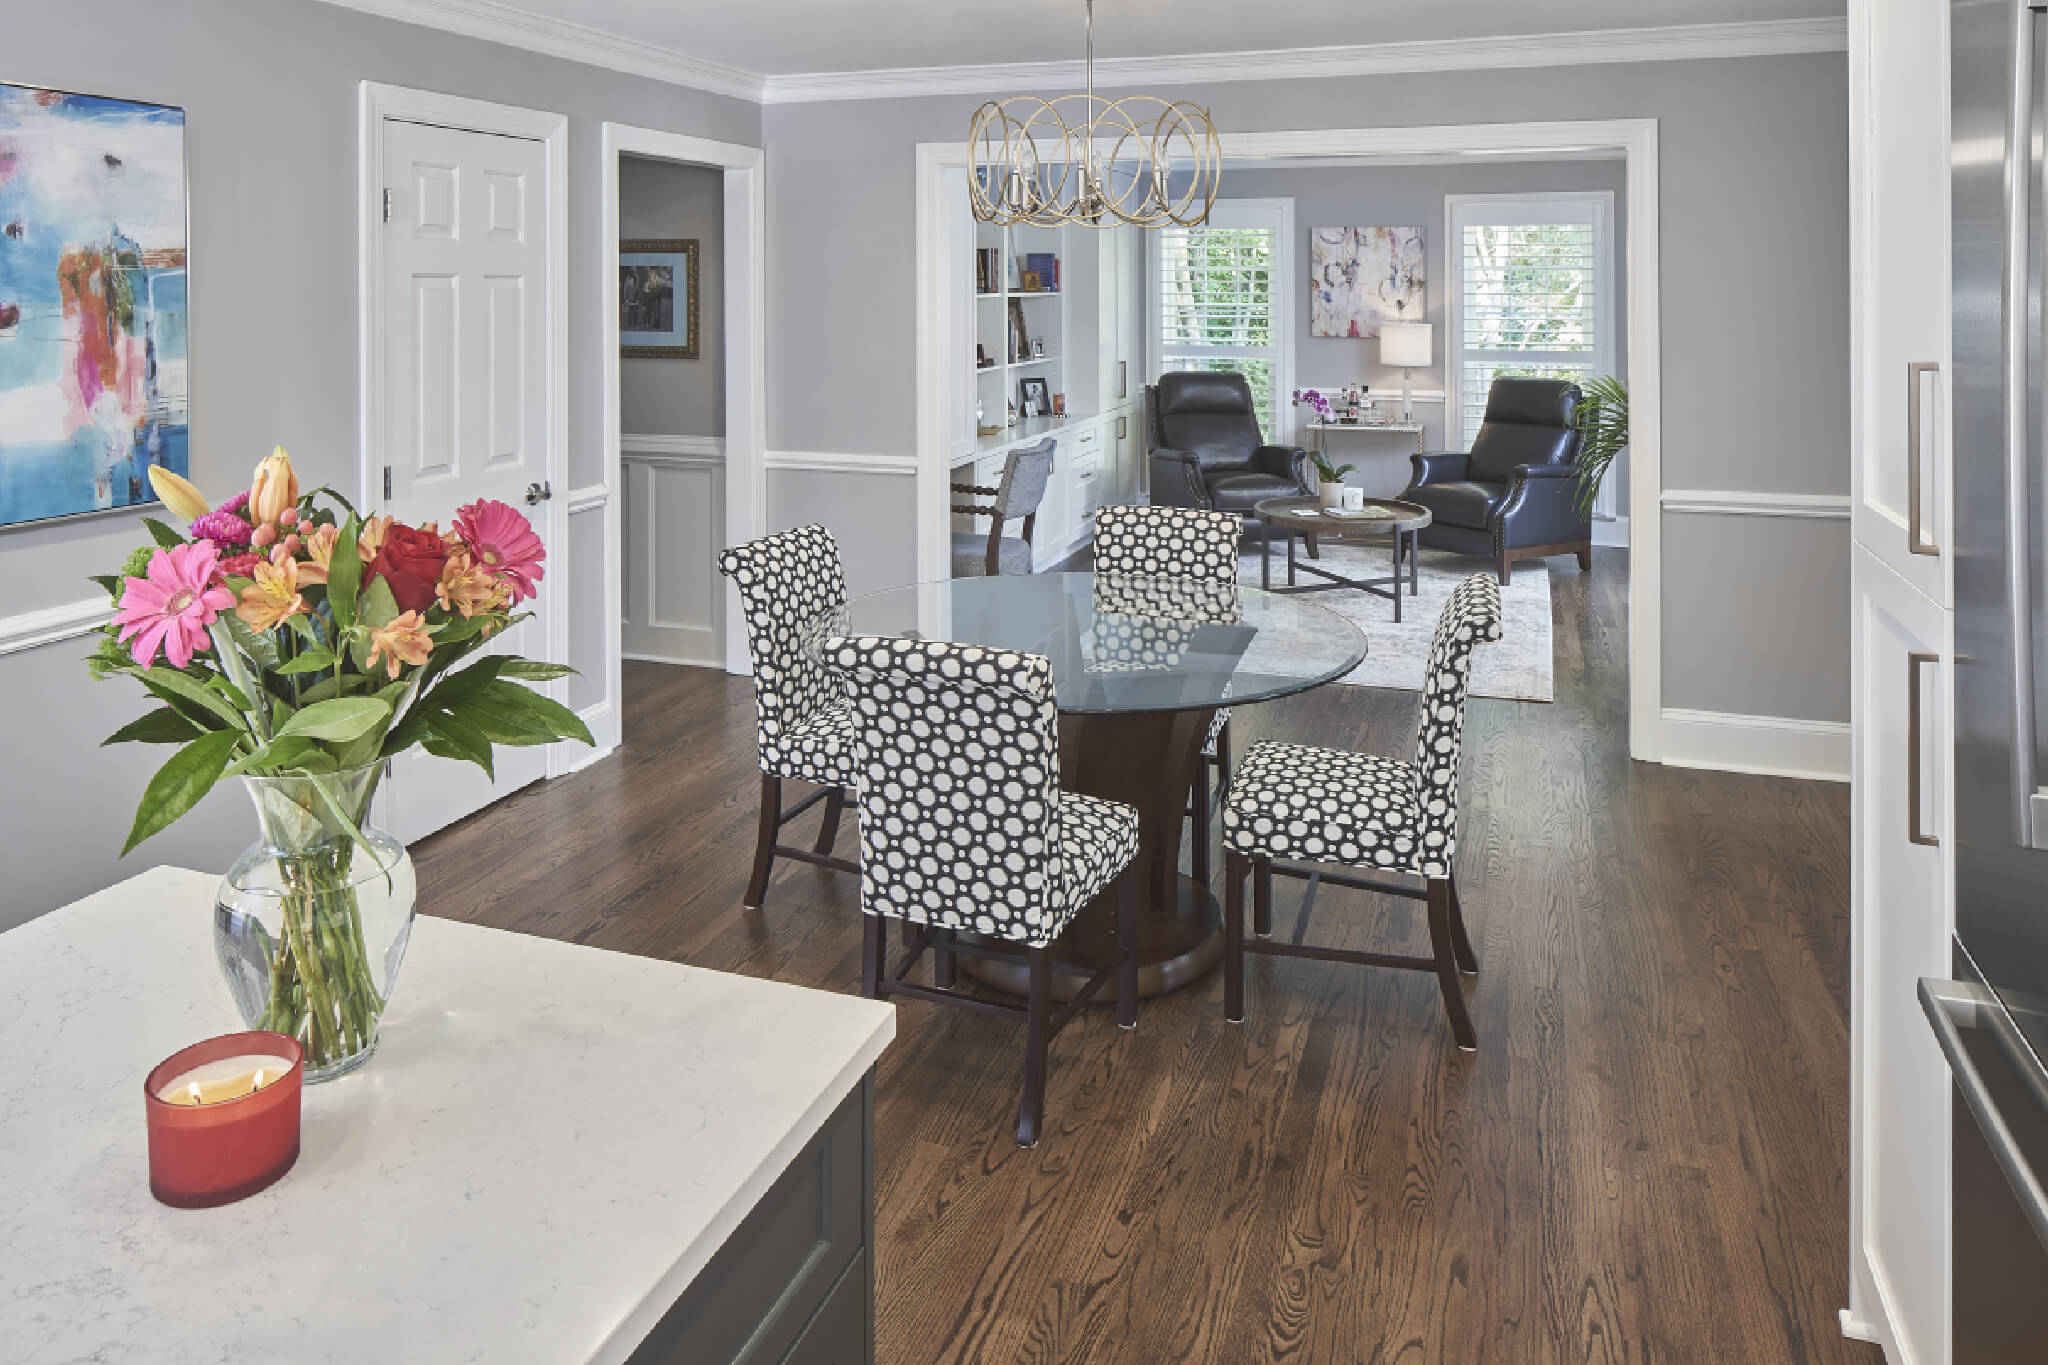 Open concept kitchen with wood floors and round glass dining room table with black & white upholstered dining chairs. Light gray walls and white trim.